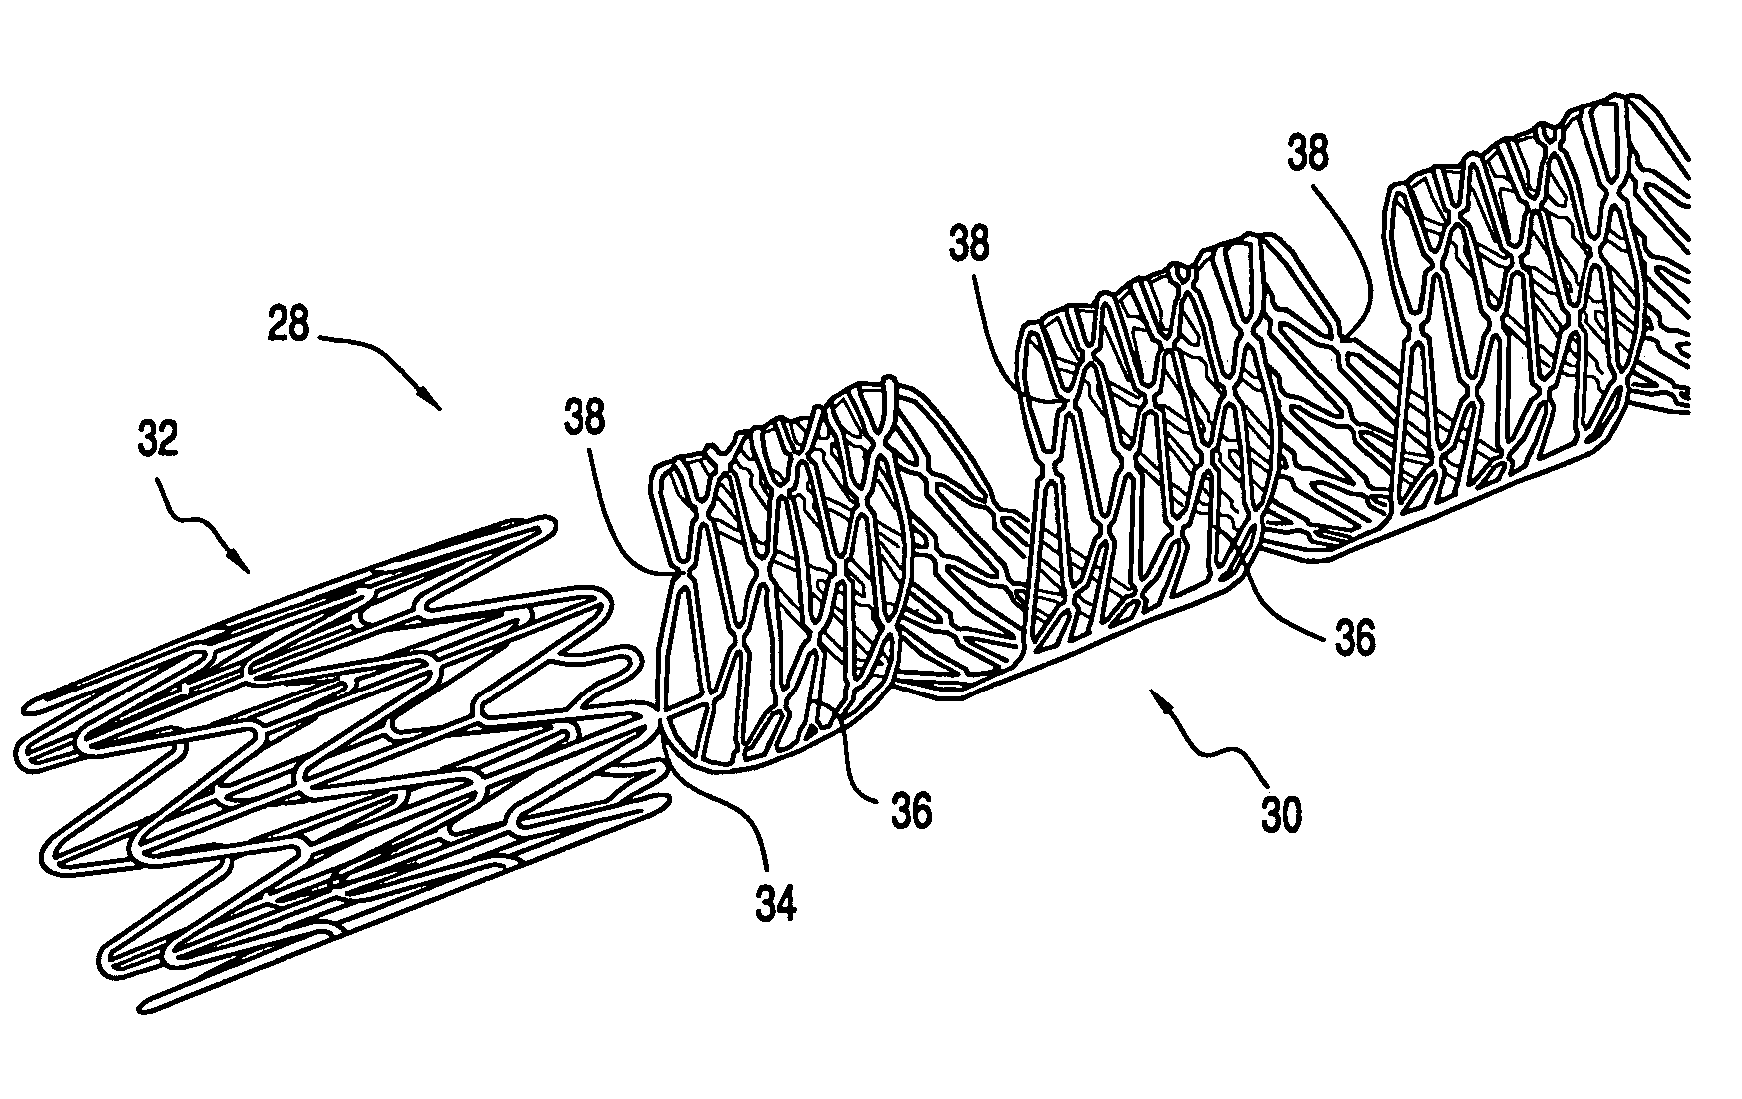 Vascular prosthesis having improved flexibility and nested cell delivery configuration